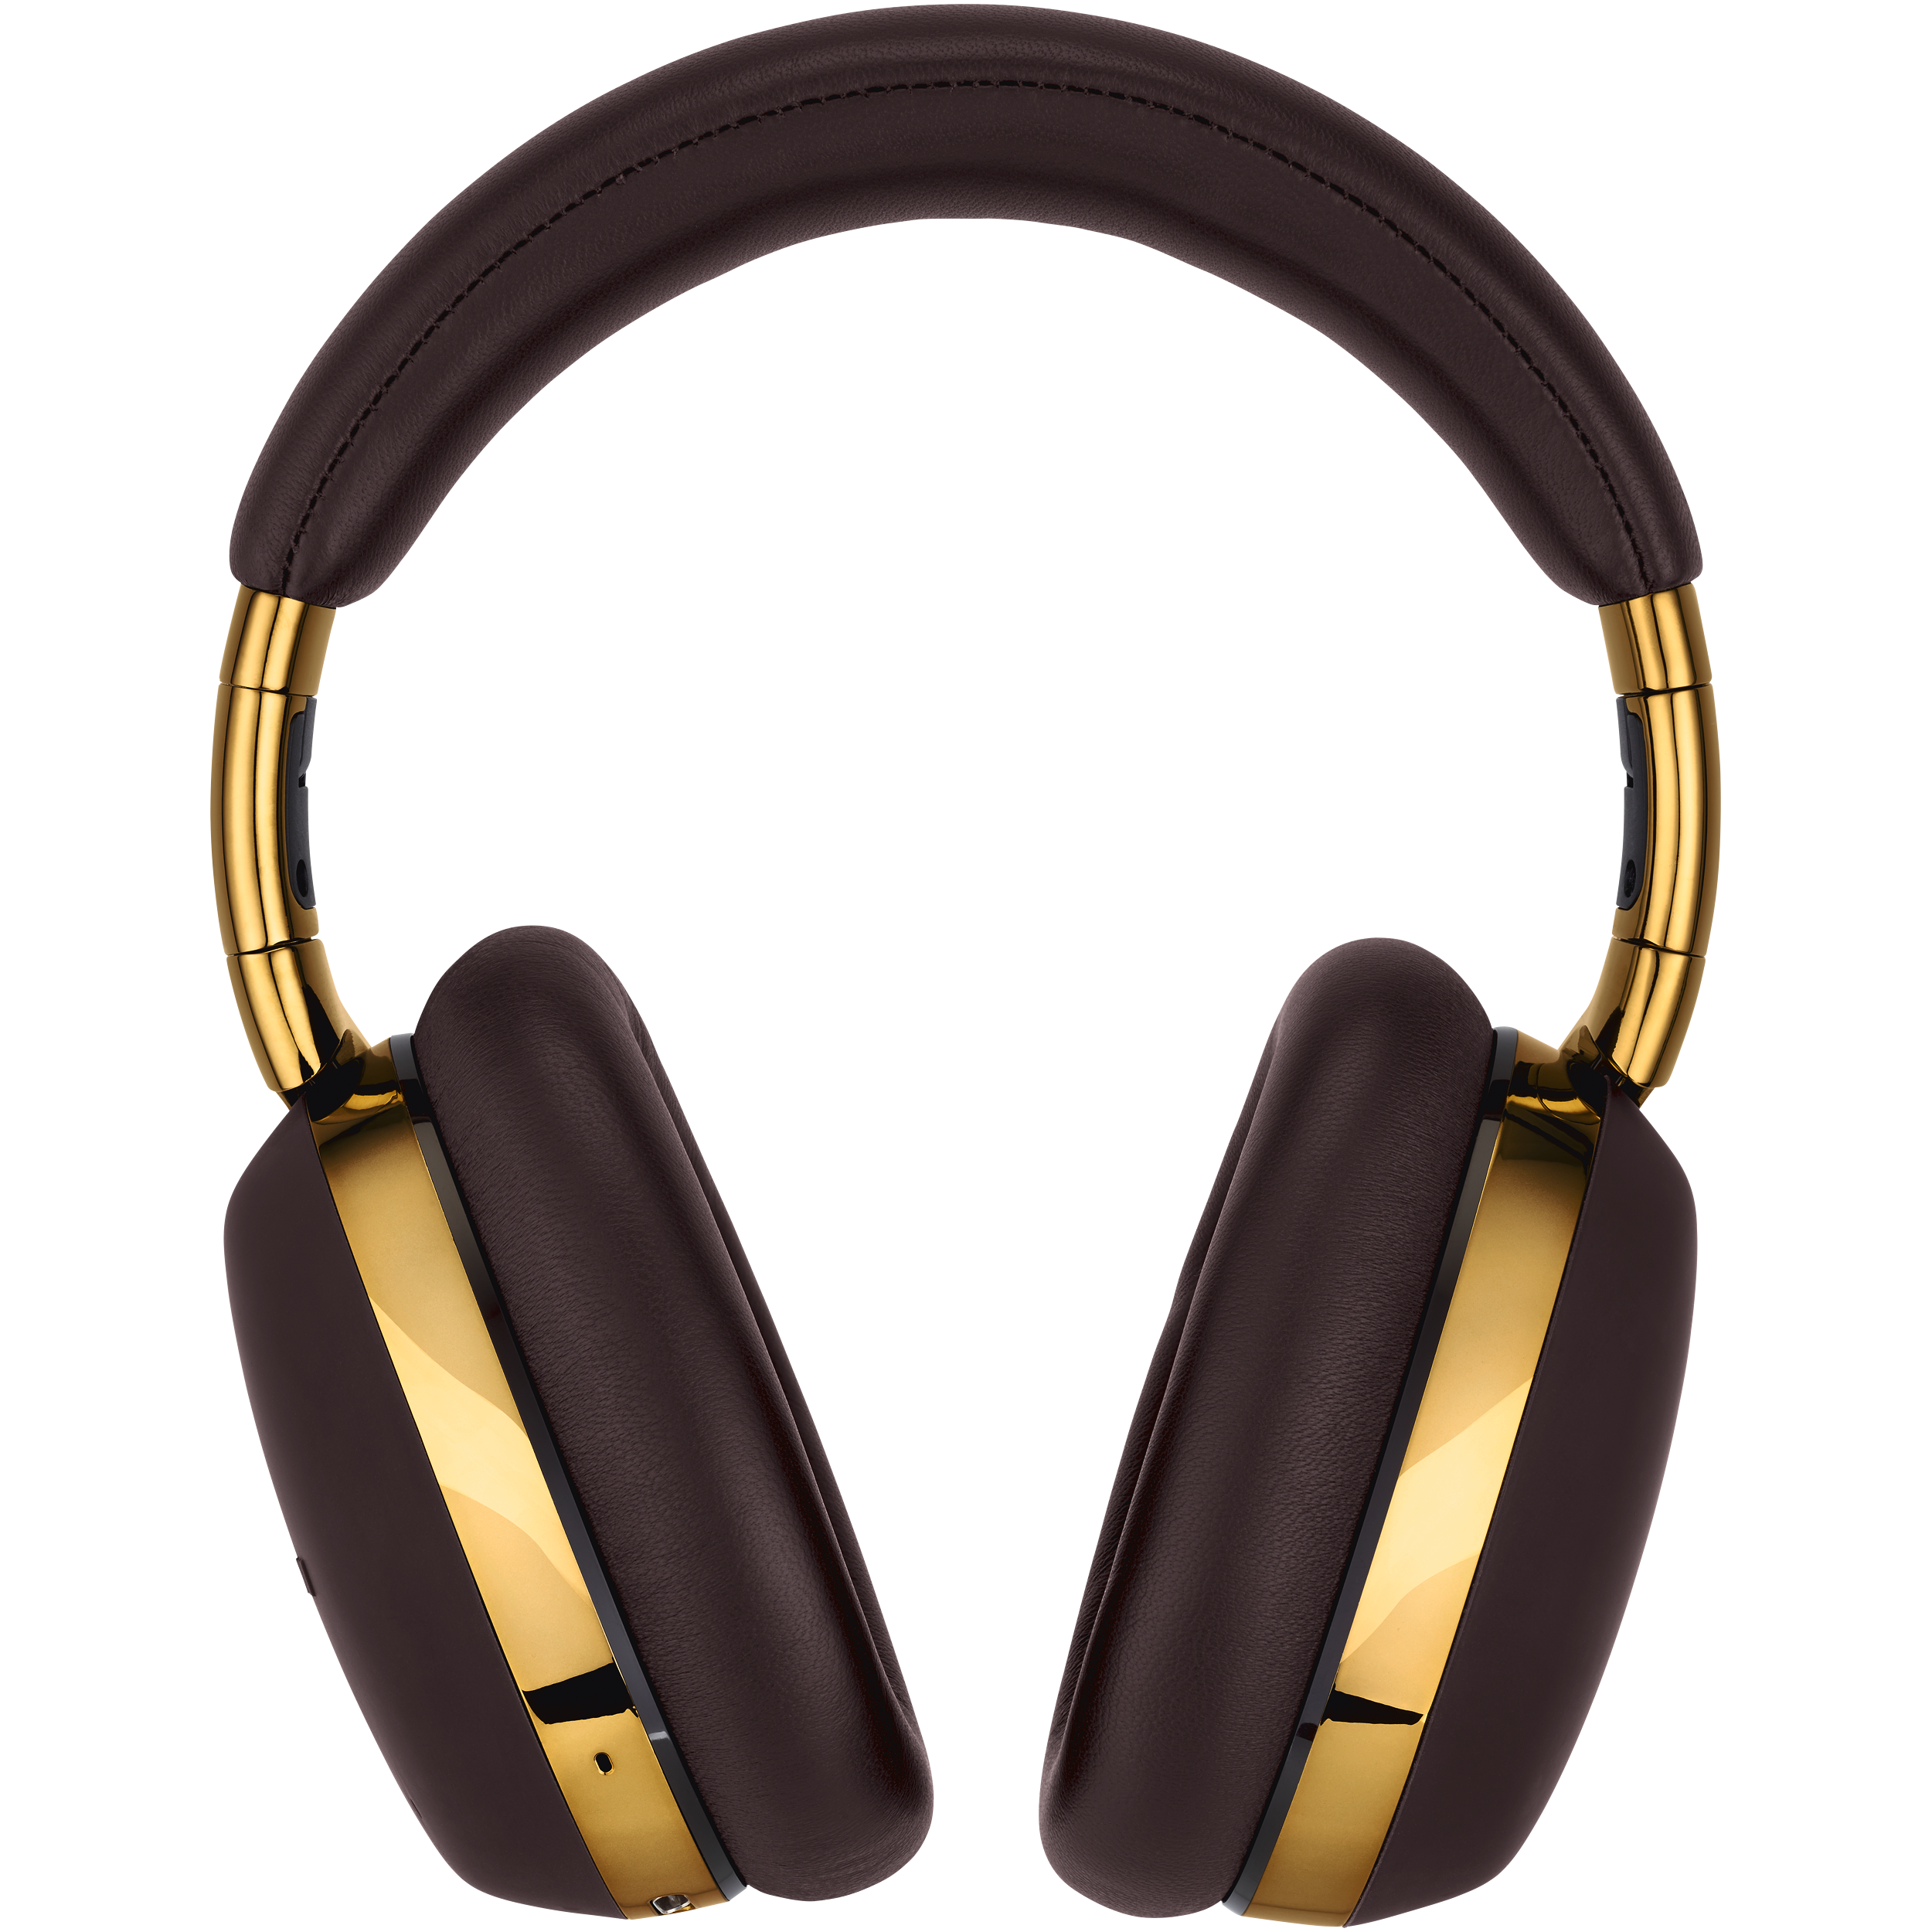 Montblanc MB 01 Over-Ear Headphones Brown, image 2